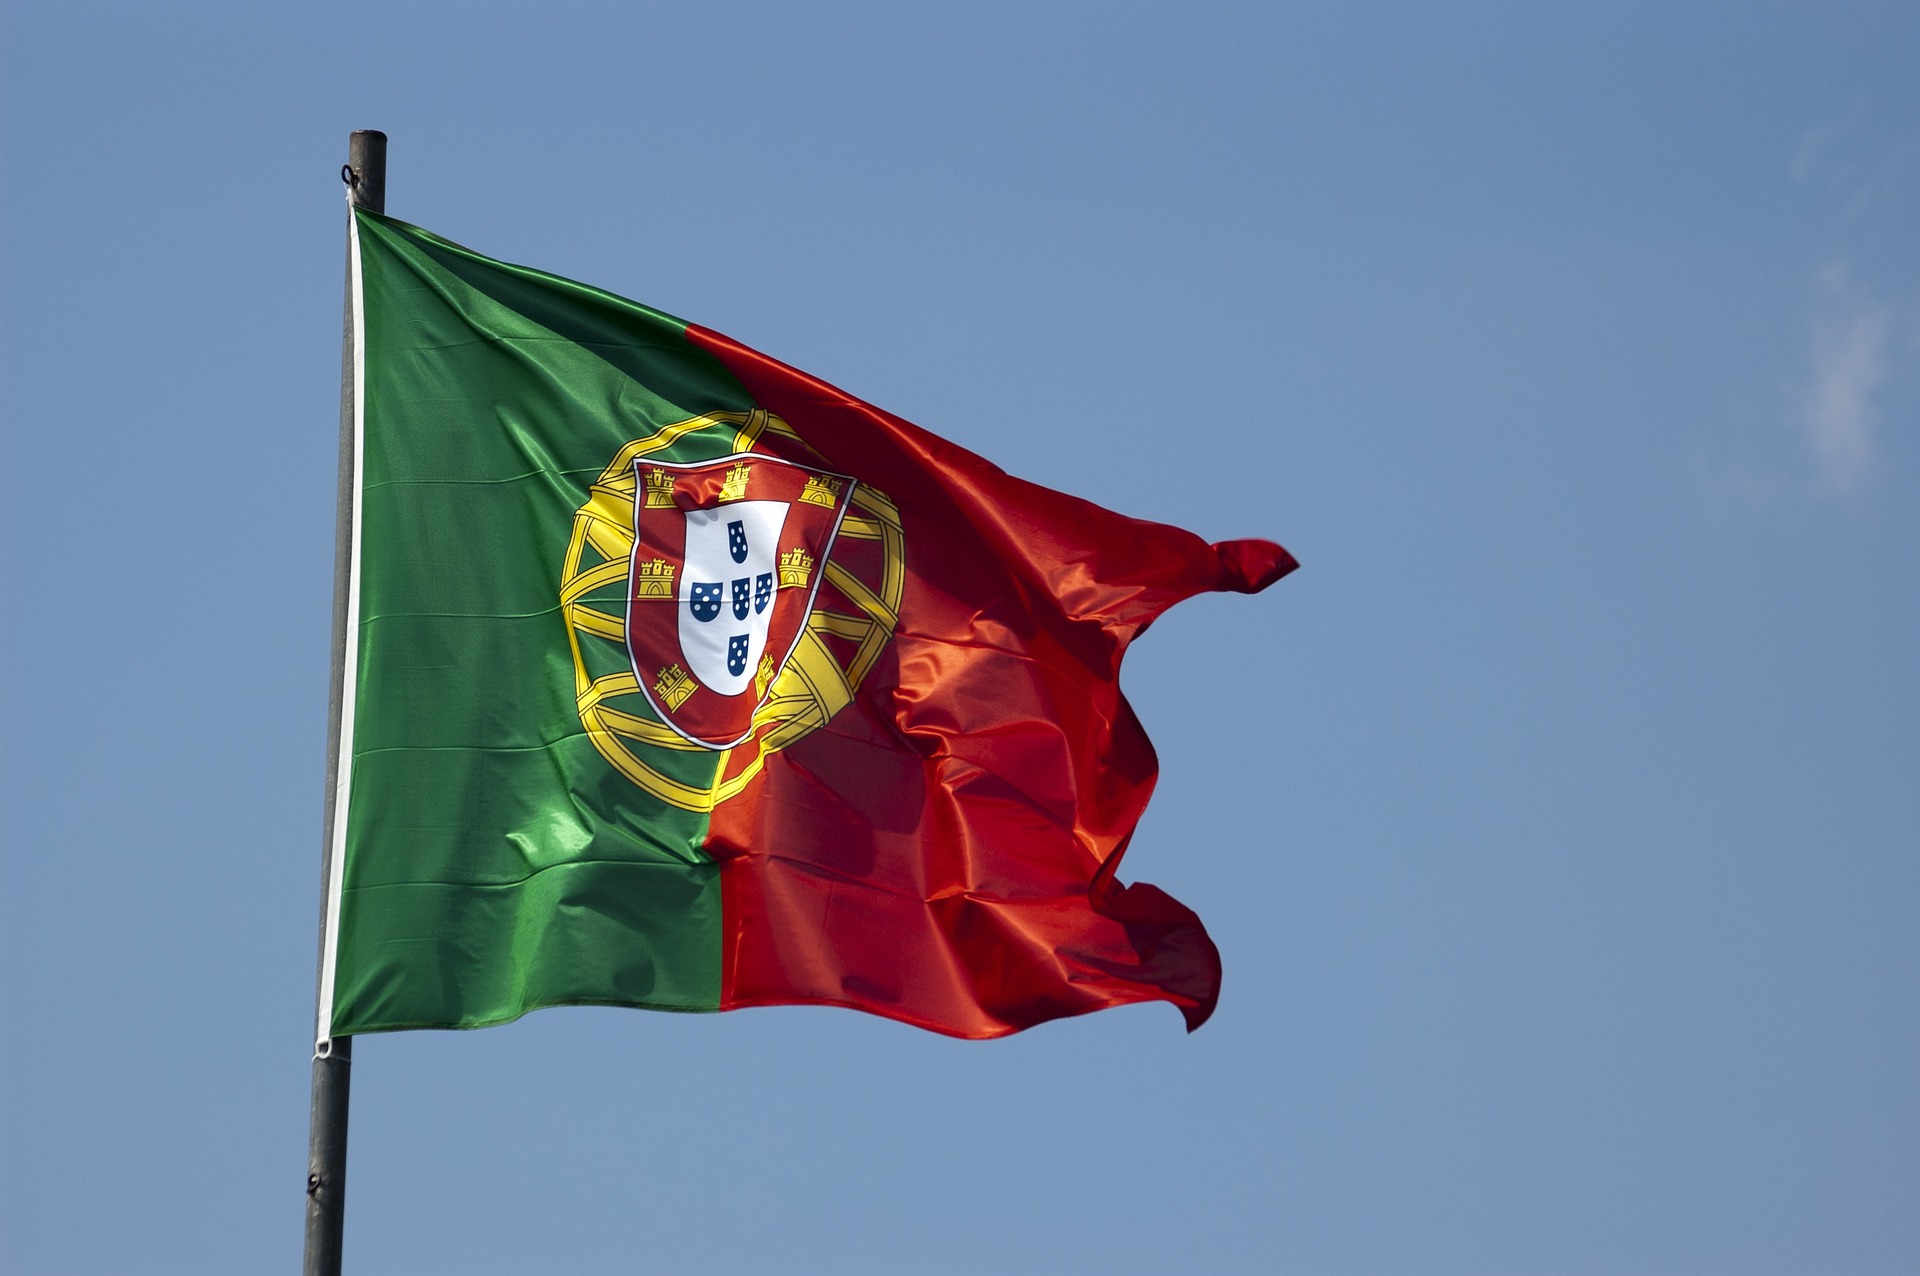 Protective elements of mental health status during the COVID-19 outbreak in the Portuguese population